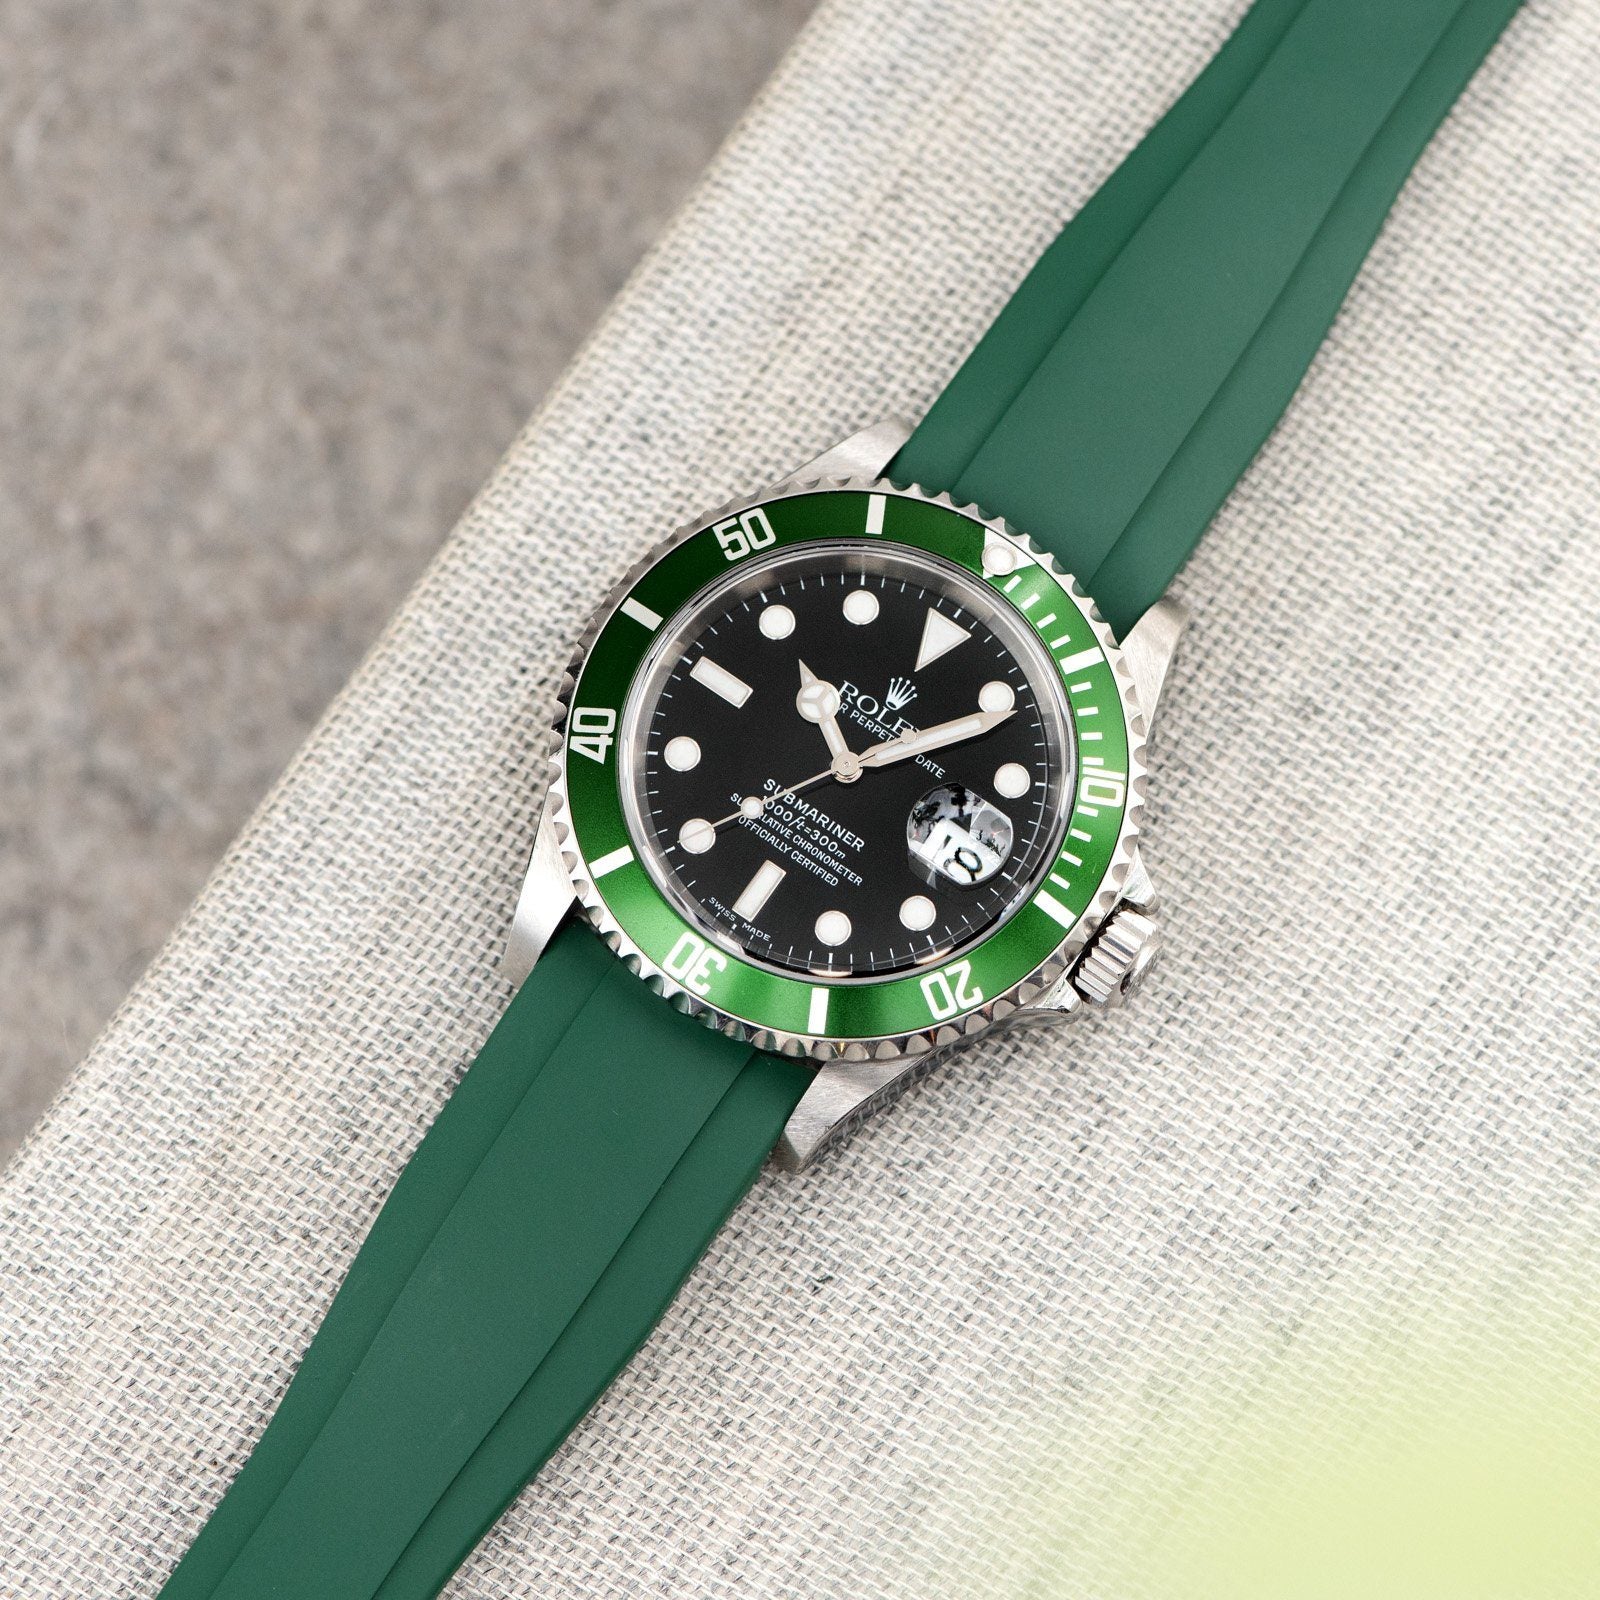 Everest Curved End Green Rubber Strap - ONLY For Modern Rolex With Deployant Clasp